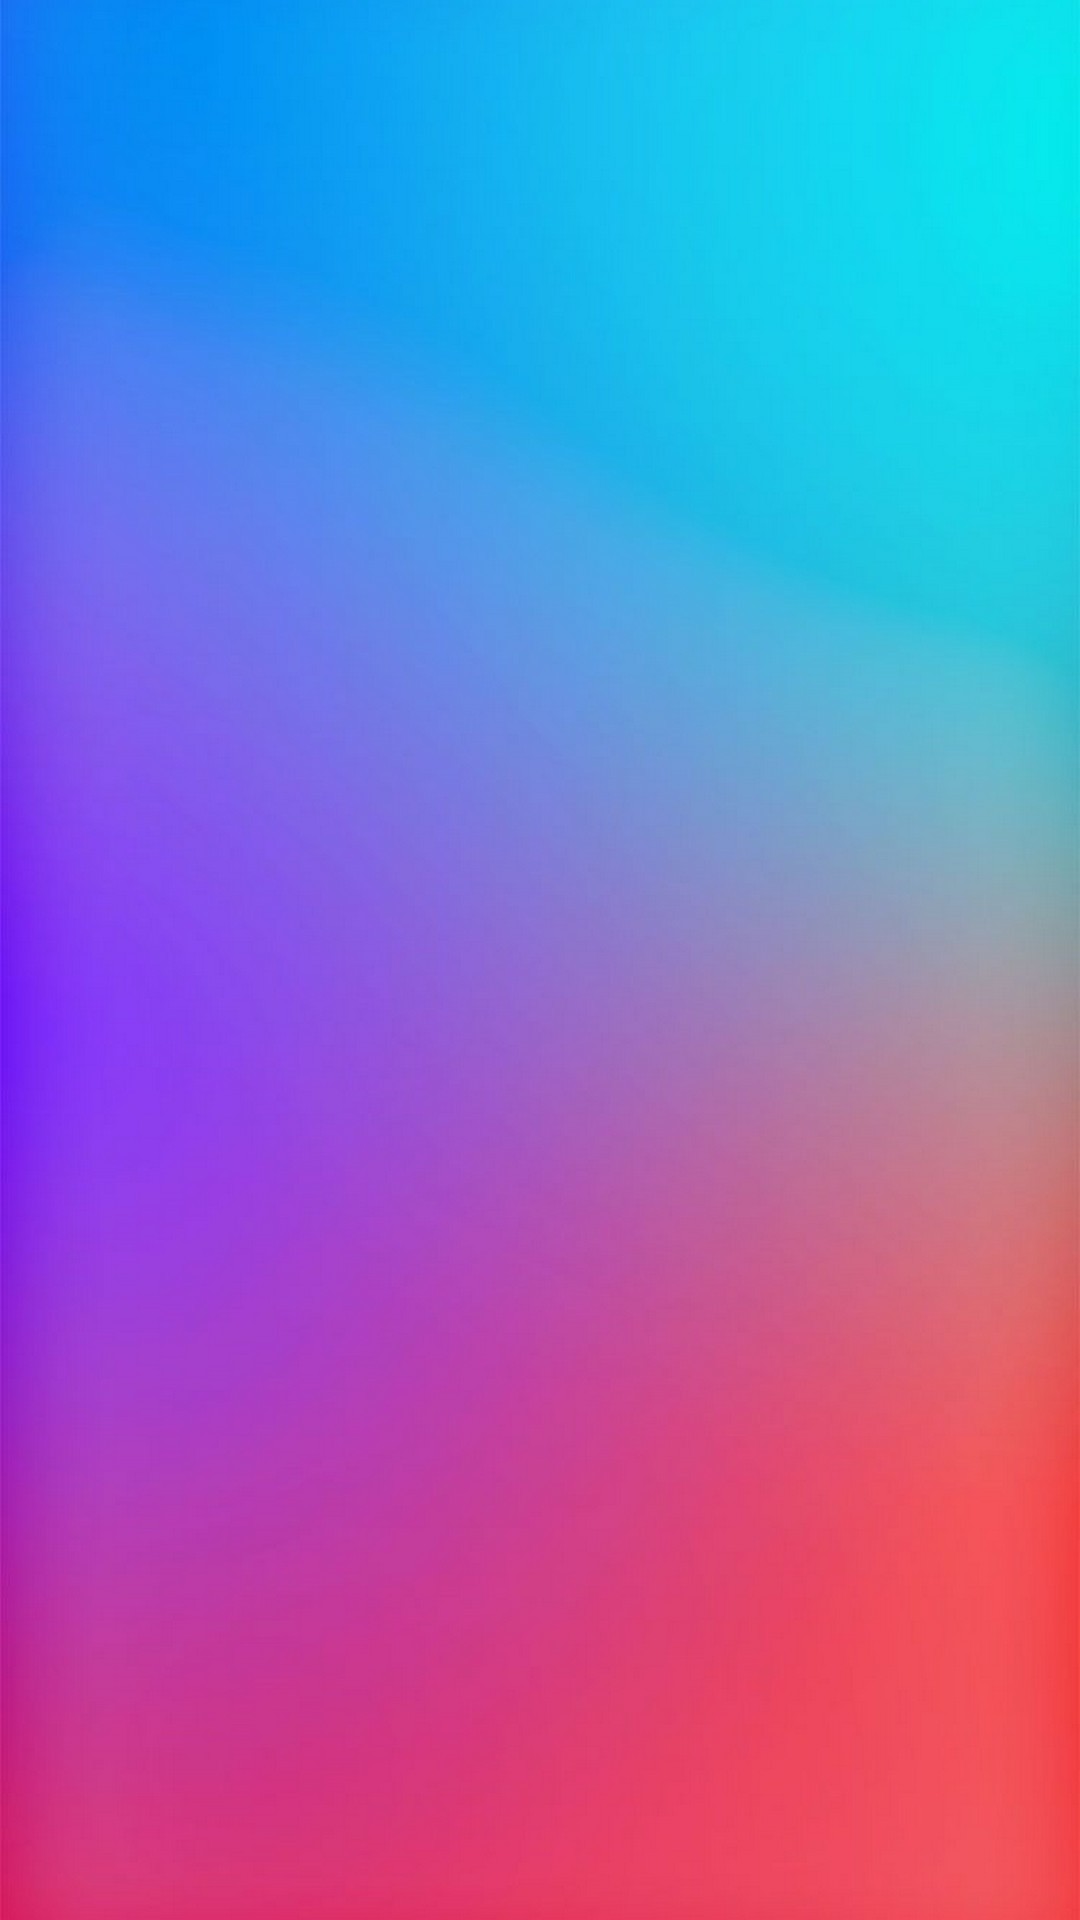 Gradient iPhone Backgrounds with high-resolution 1080x1920 pixel. You can set as wallpaper for Apple iPhone X, XS Max, XR, 8, 7, 6, SE, iPad. Enjoy and share your favorite HD wallpapers and background images